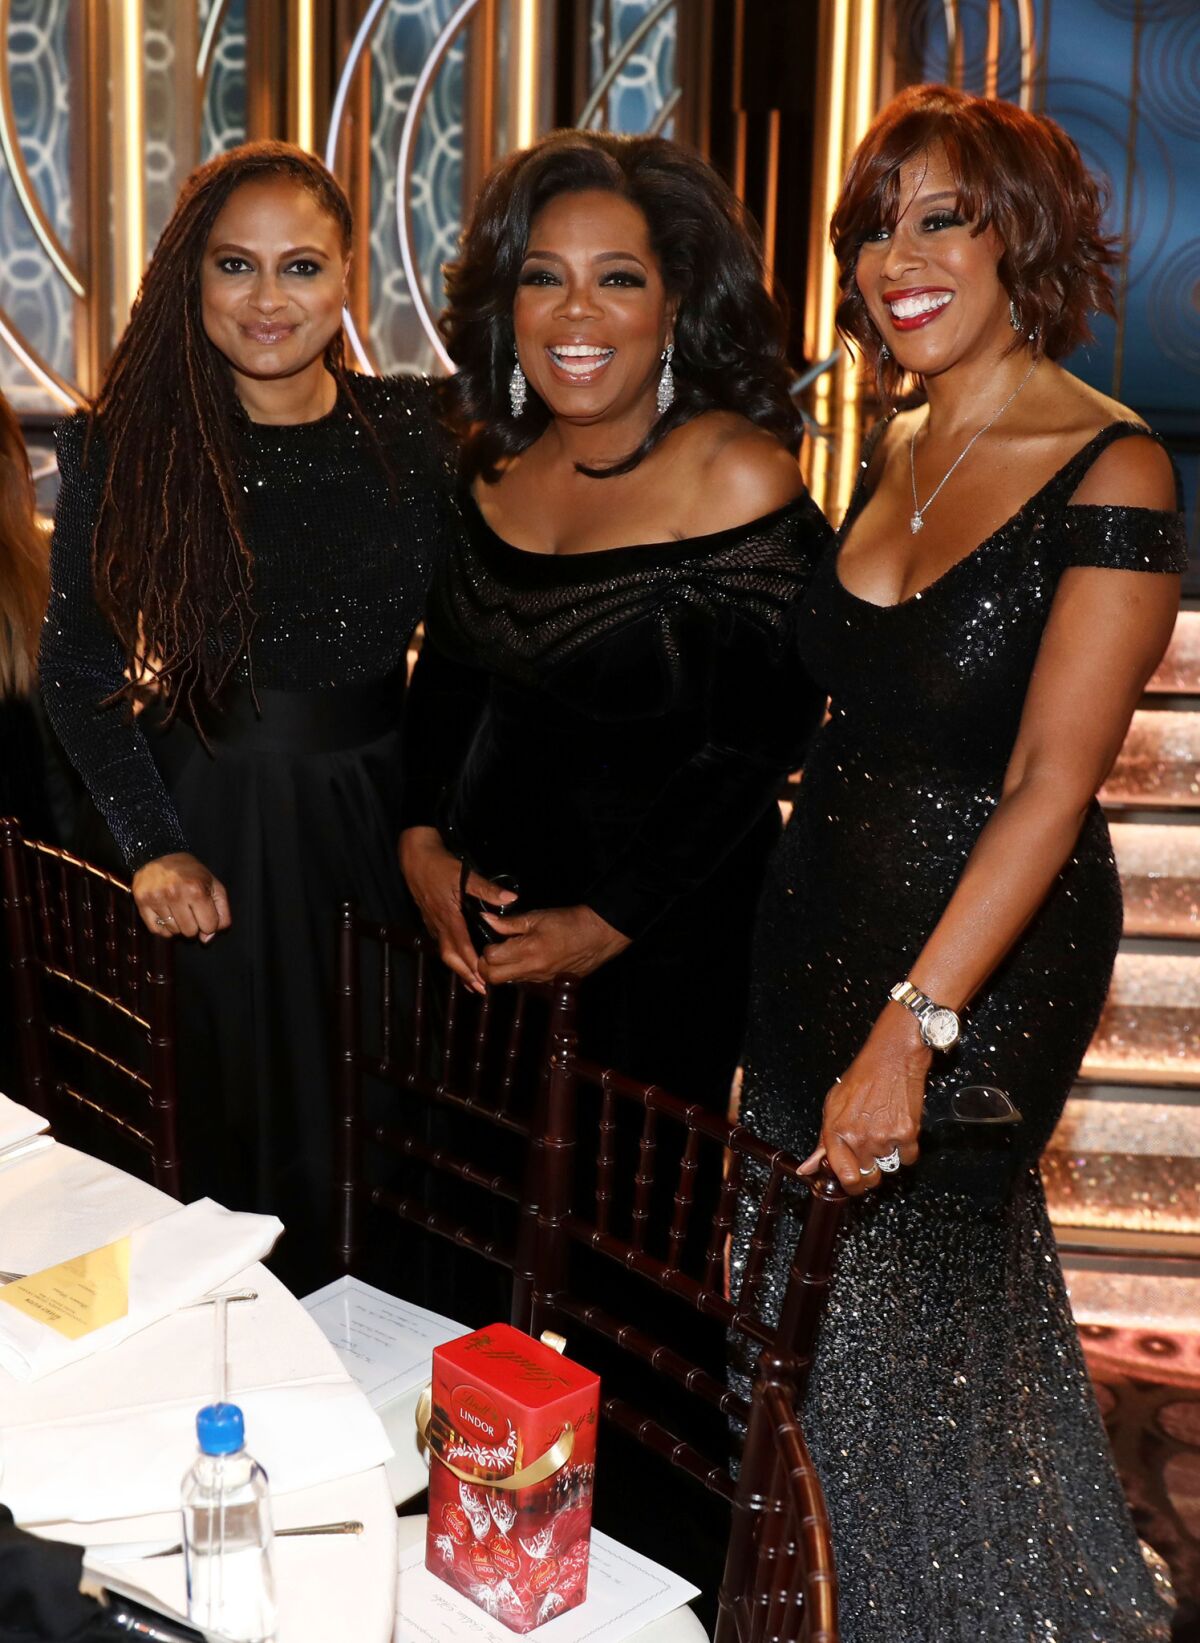 From left, Ava DuVernay, Oprah Winfrey and Gayle King are seen at the Golden Globes on Sunday in Beverly Hills.